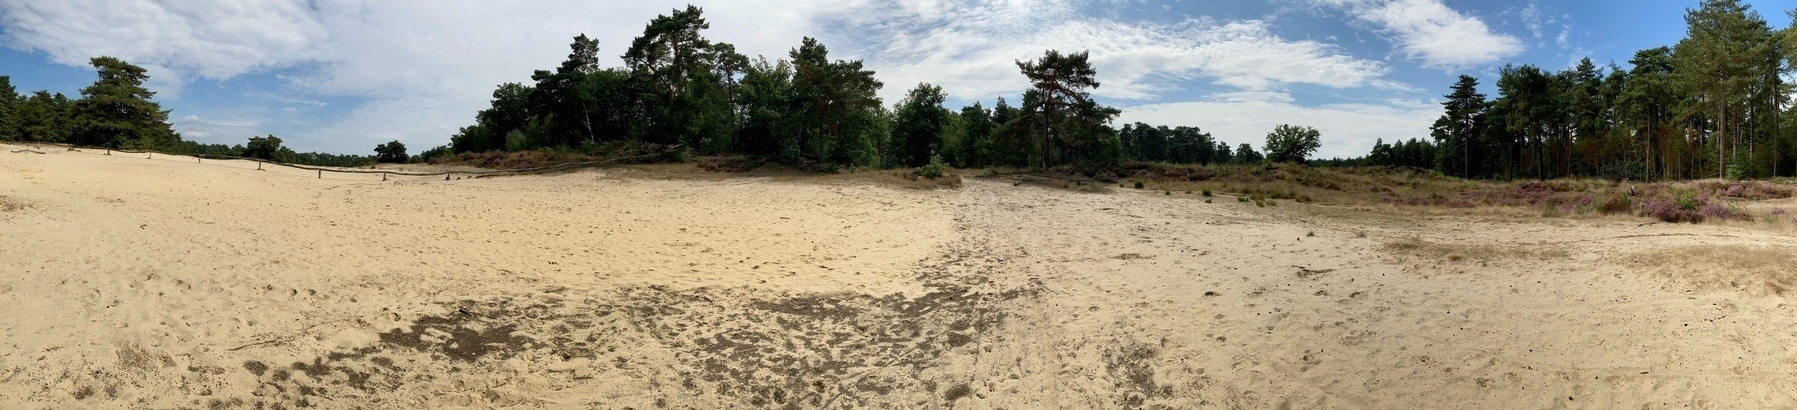 panoramic view of sand plane surrounded by forest